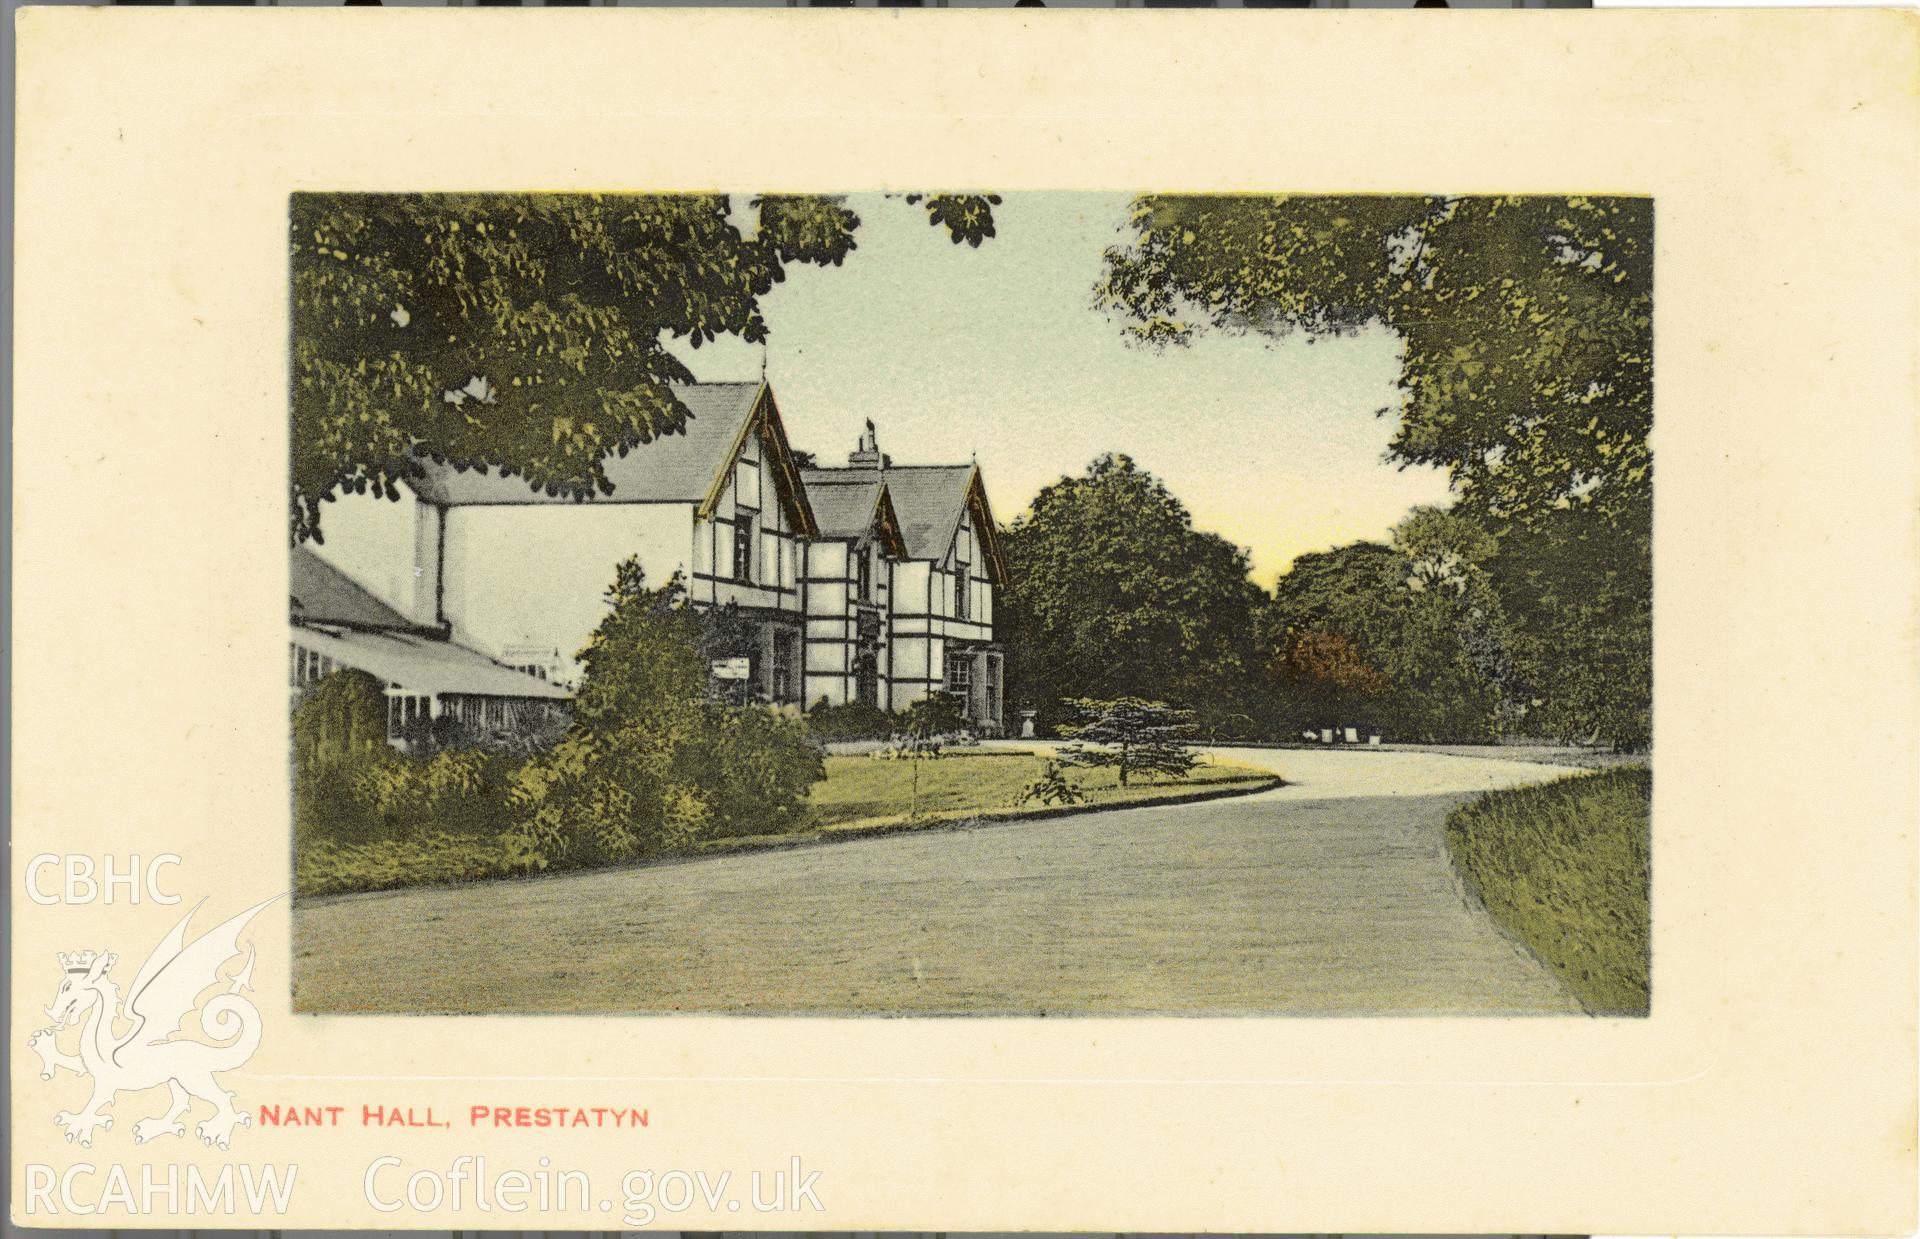 Digitised postcard image of Nant Hall Hotel, Prestatyn, TJ Burrows, Prestatyn. Produced by Parks and Gardens Data Services, from an original item in the Peter Davis Collection at Parks and Gardens UK. We hold only web-resolution images of this collection, suitable for viewing on screen and for research purposes only. We do not hold the original images, or publication quality scans.